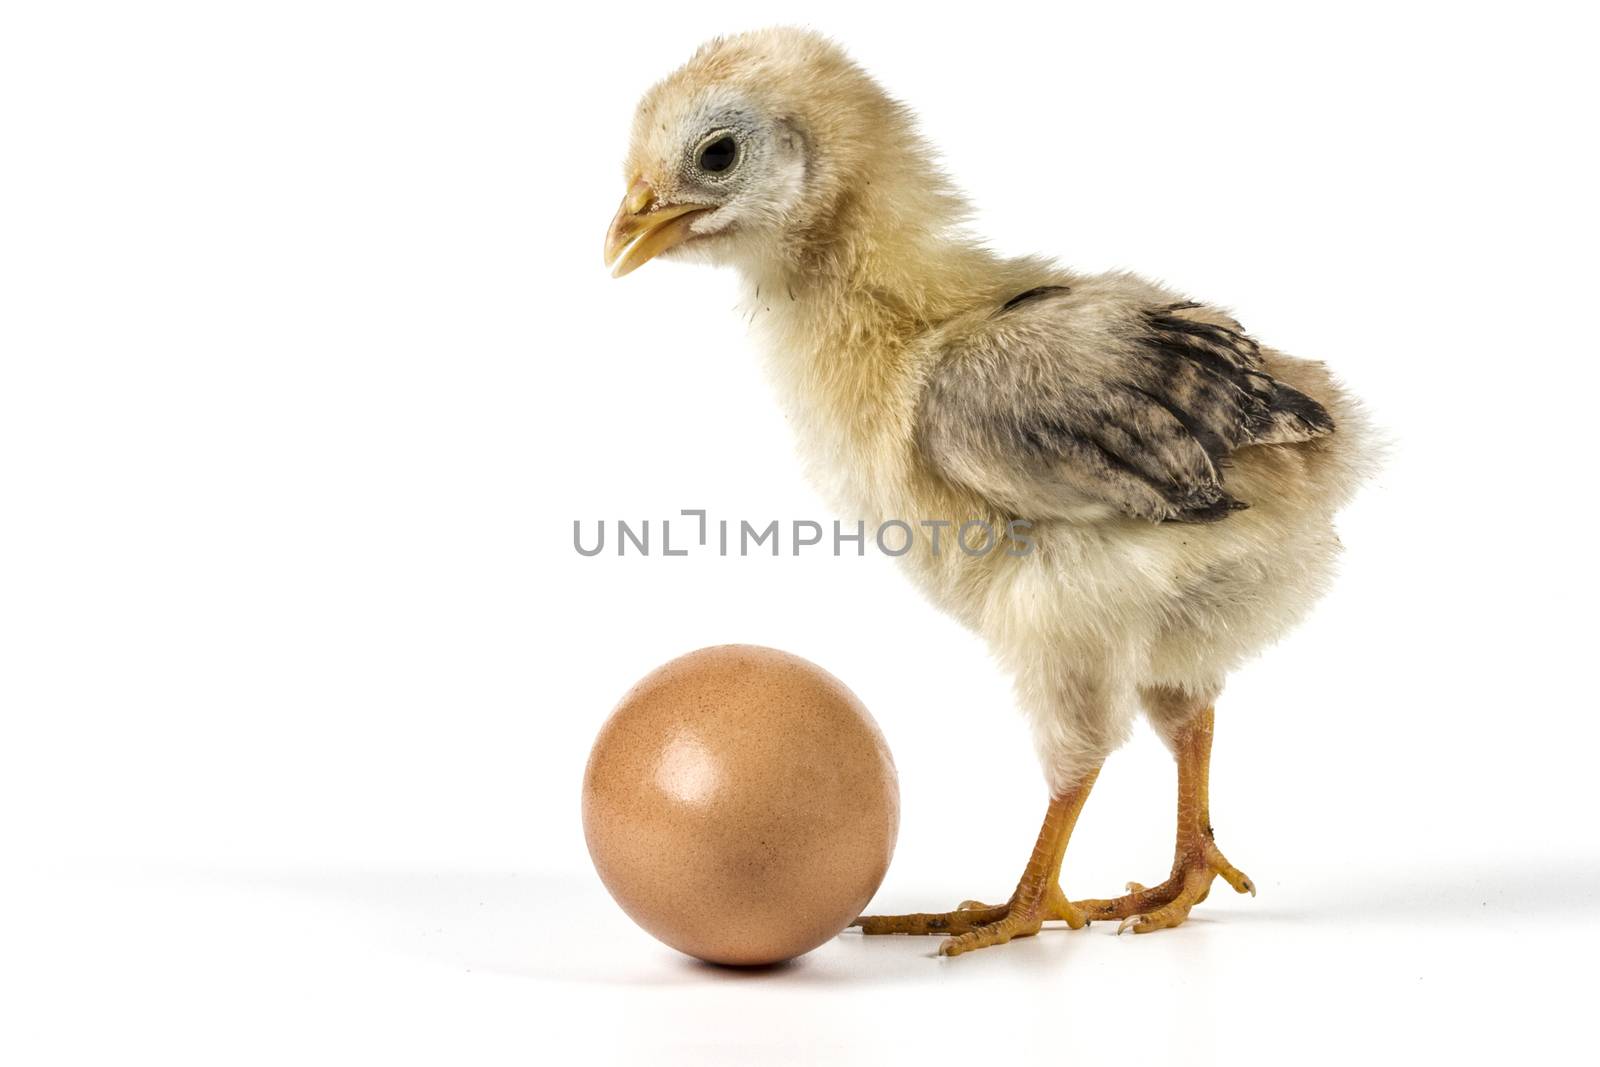 Chicken And Egg by orcearo